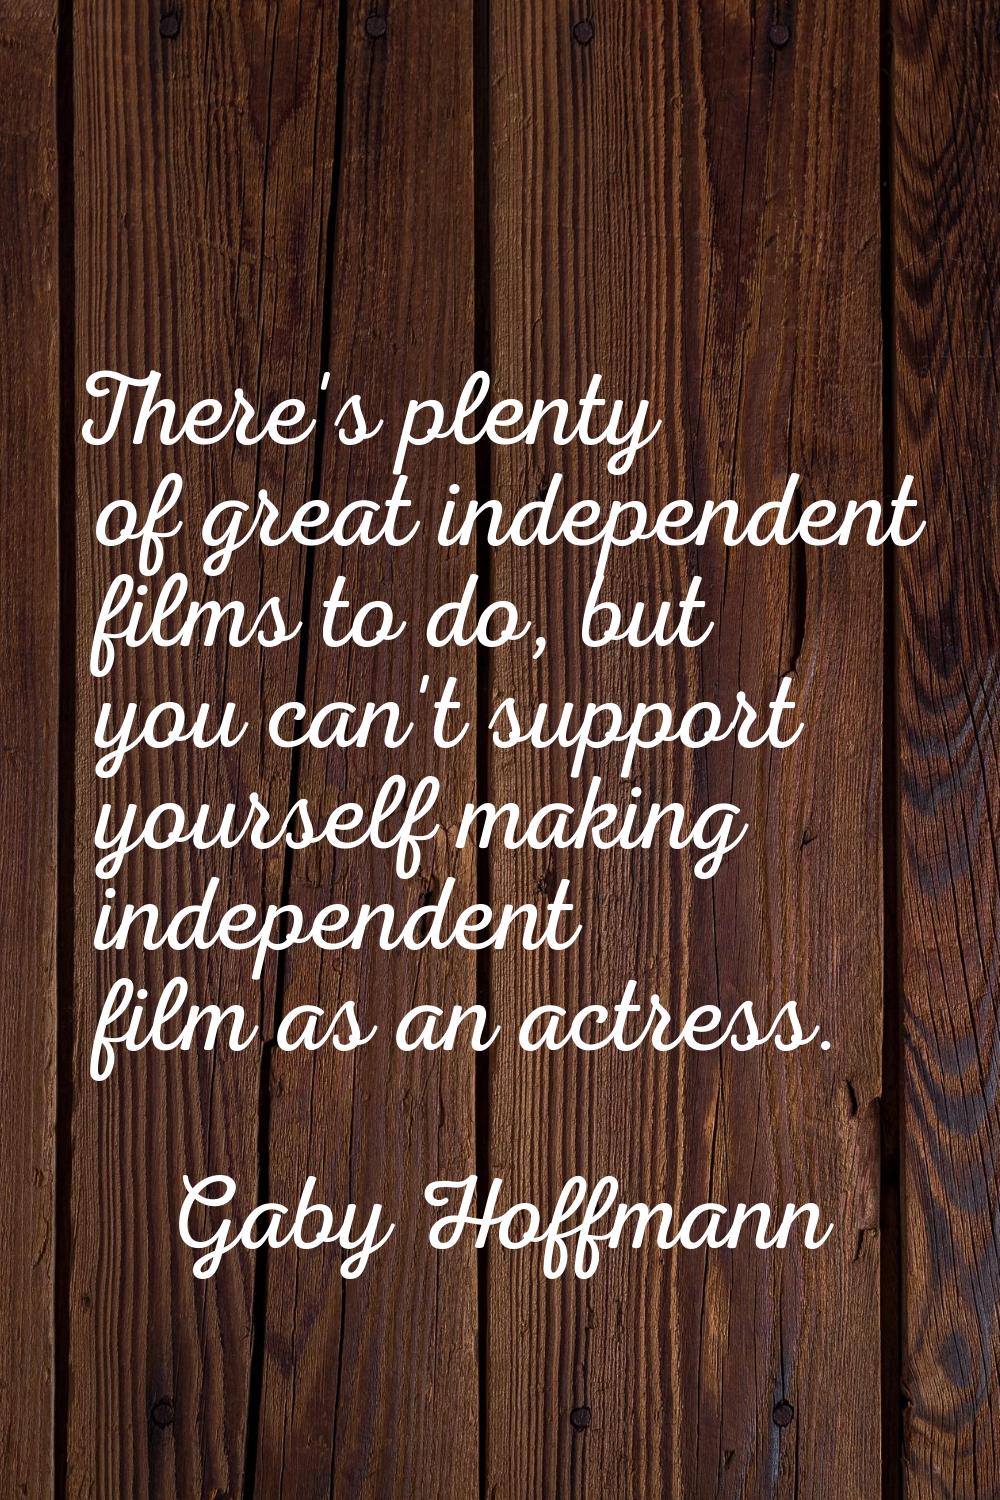 There's plenty of great independent films to do, but you can't support yourself making independent 